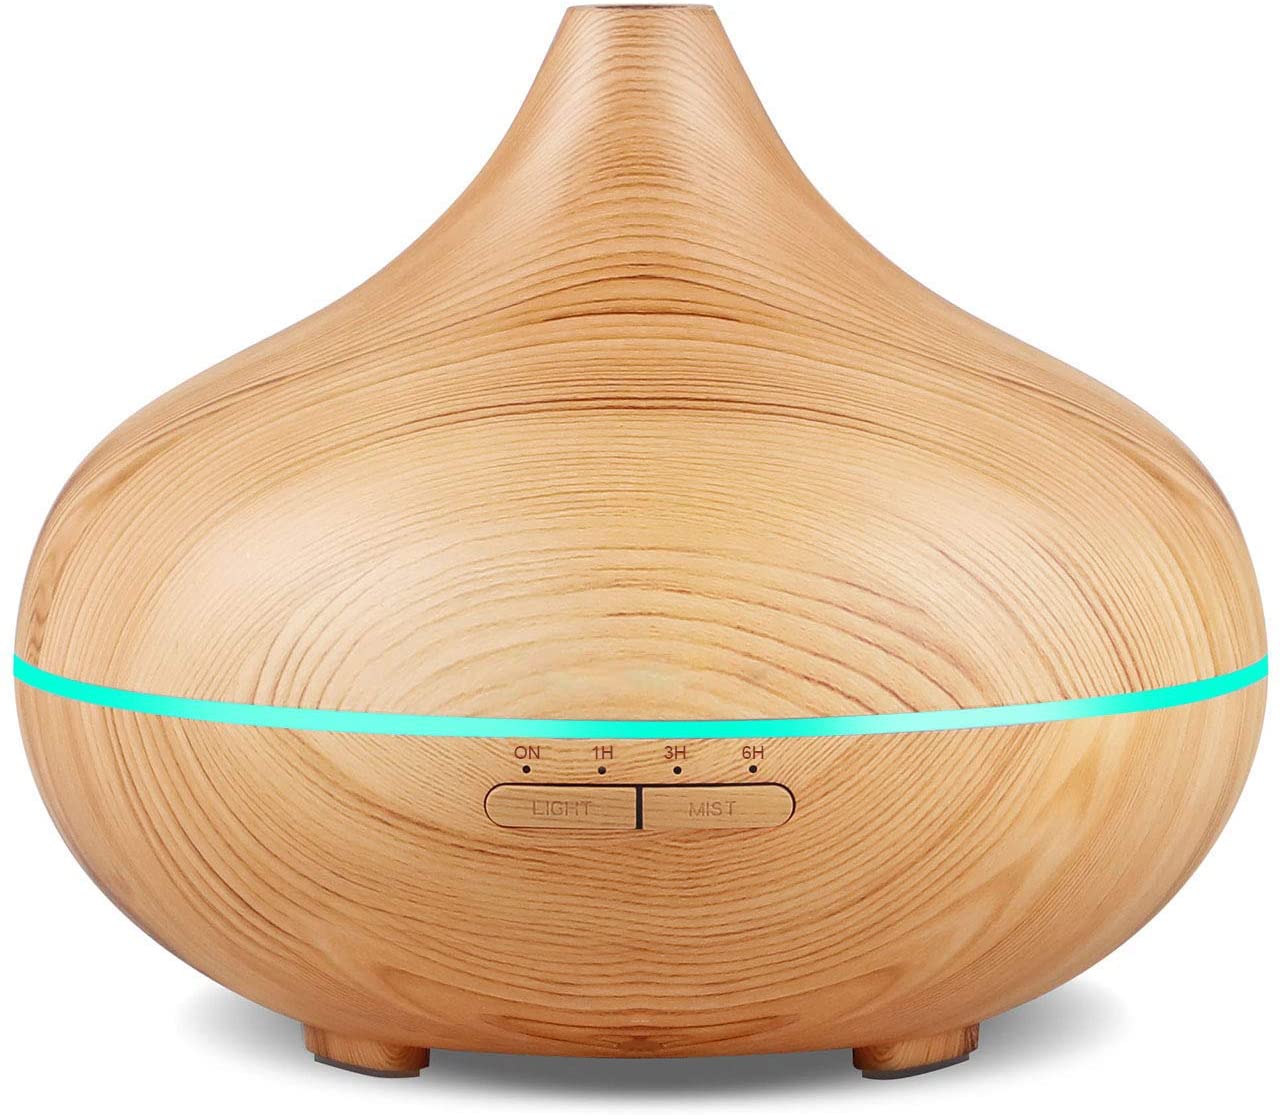 500ml Aromatherapy Essential Oil Diffuser Wood Grain Cool Mist Humidifier Room Decor Lighting with 7 LED Color Changing Lamp